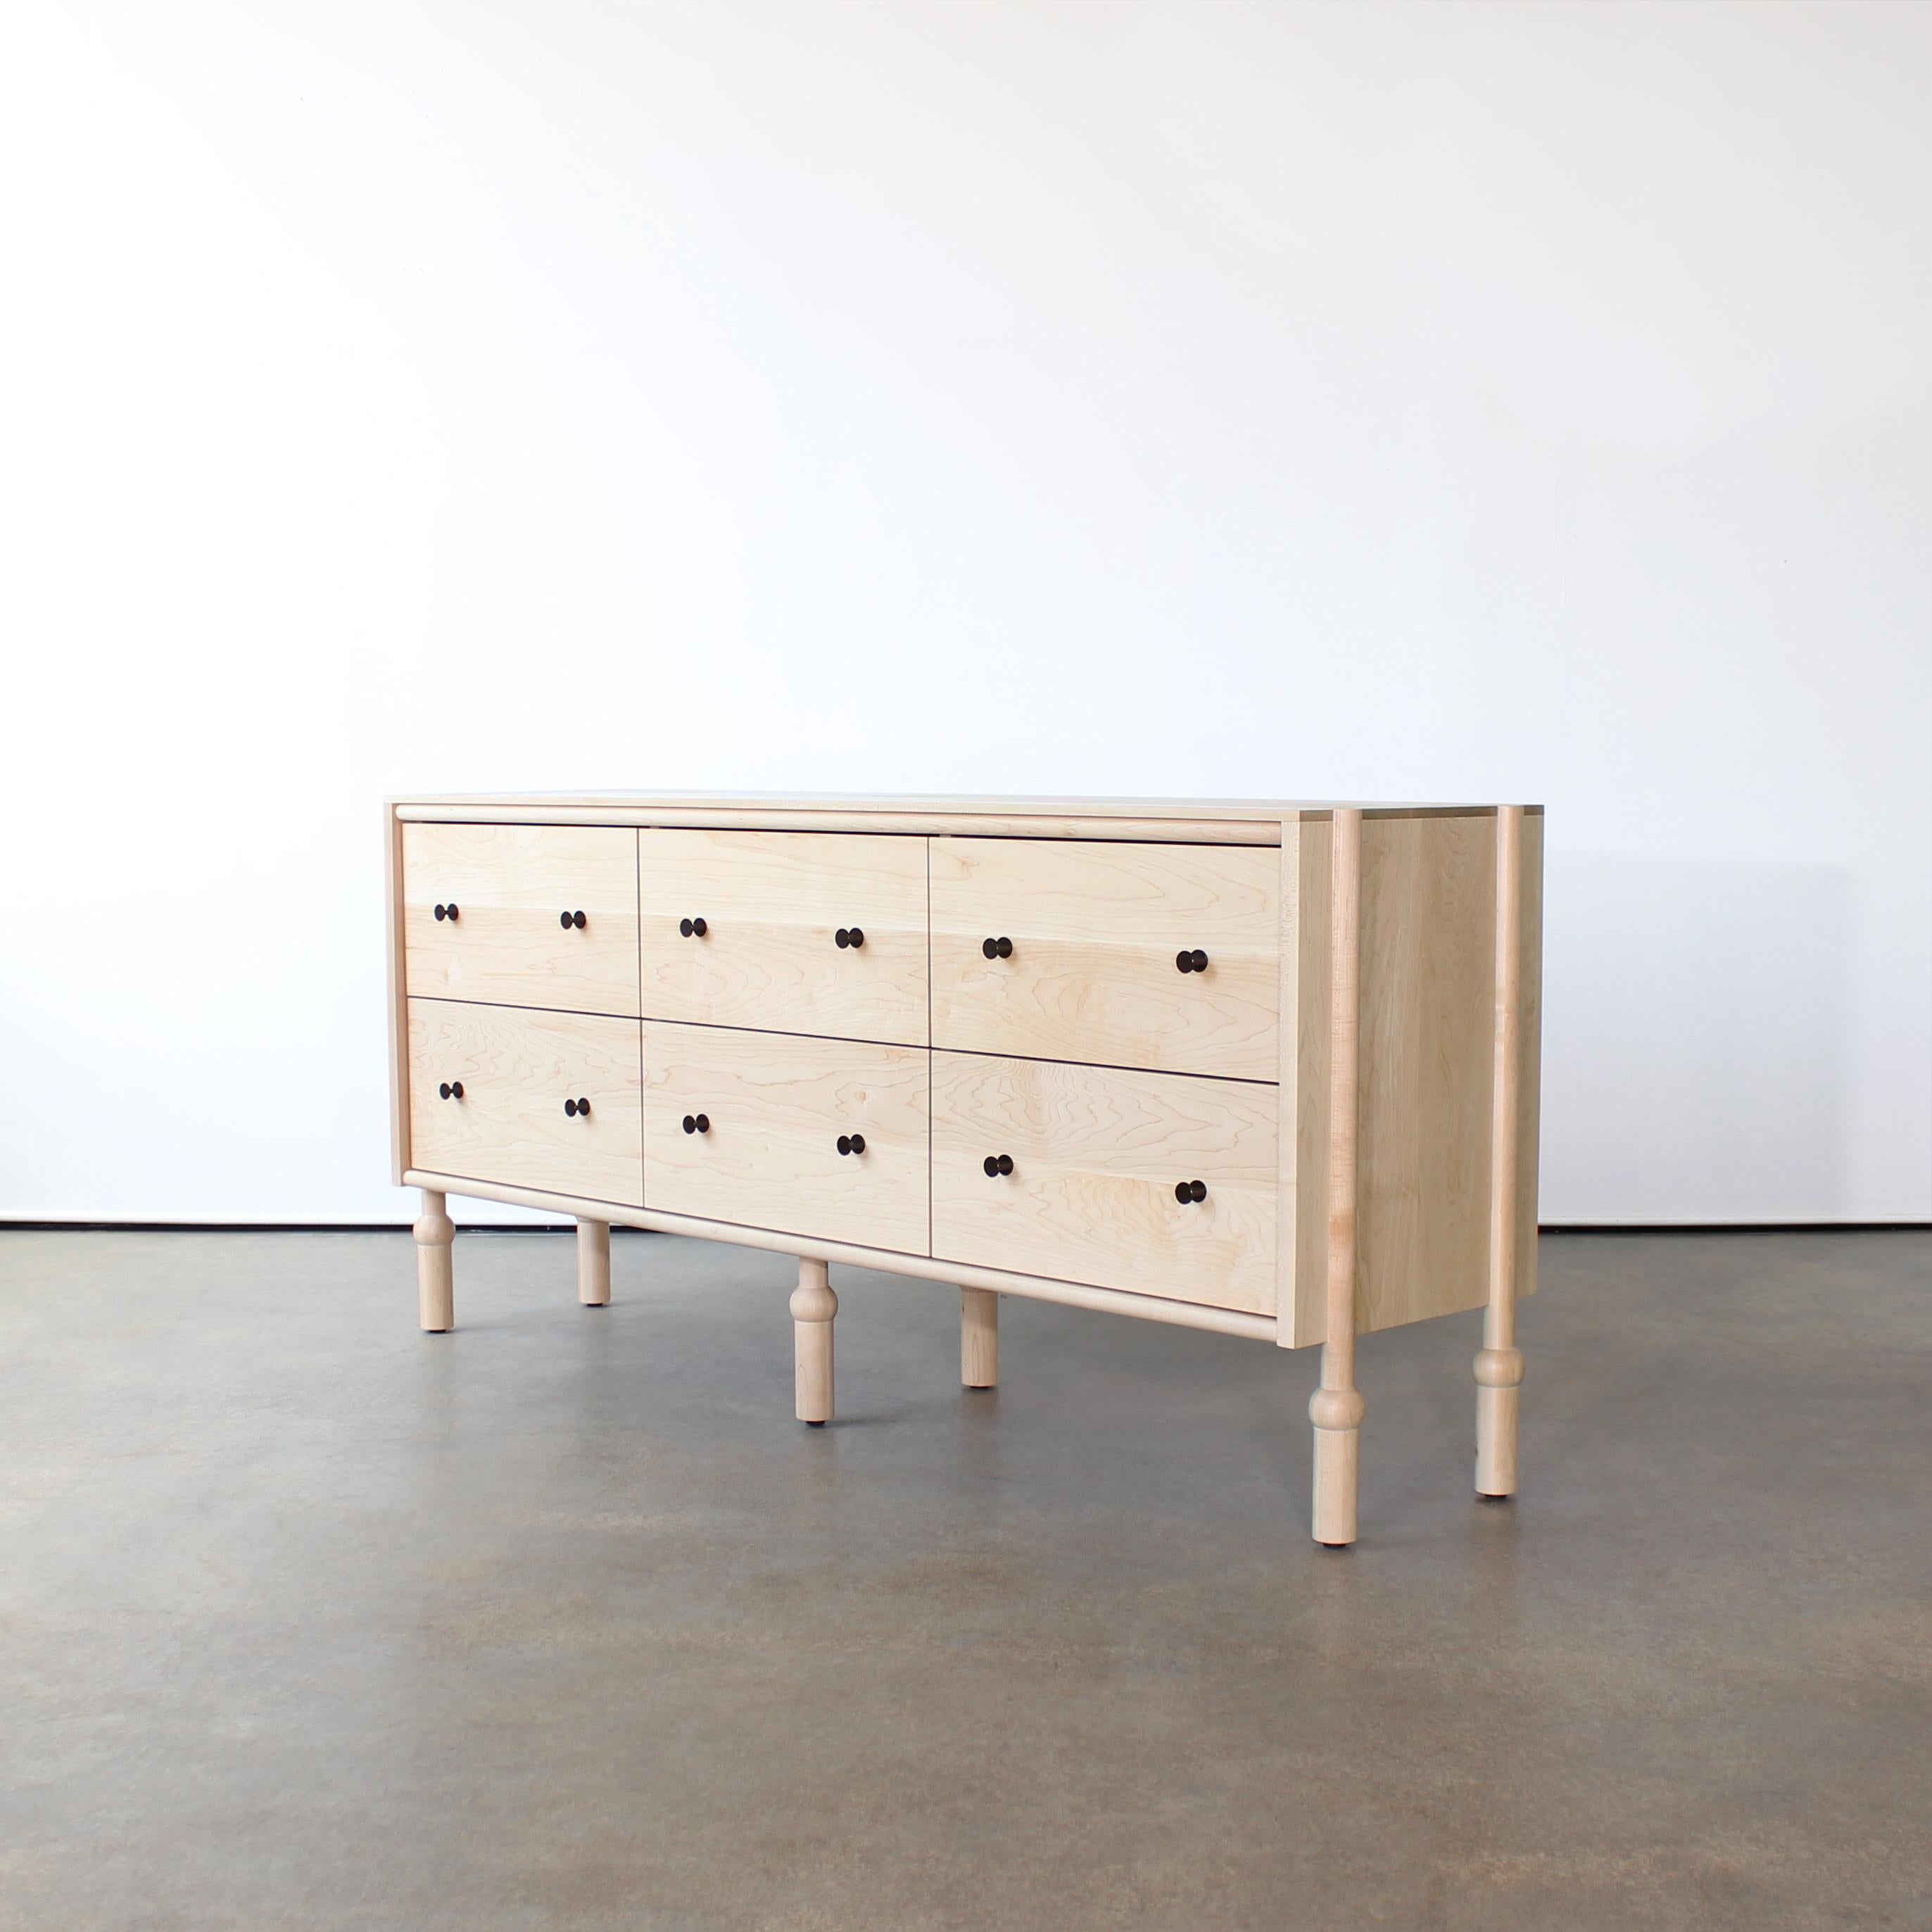 Mae dresser by Crump and Kwash.

Solid wood case / hand turned legs / hand rubbed oil finish / solid brass pulls / premium, full extension, soft close drawer slides / solid wood, dovetailed drawer boxes

Customizations available.